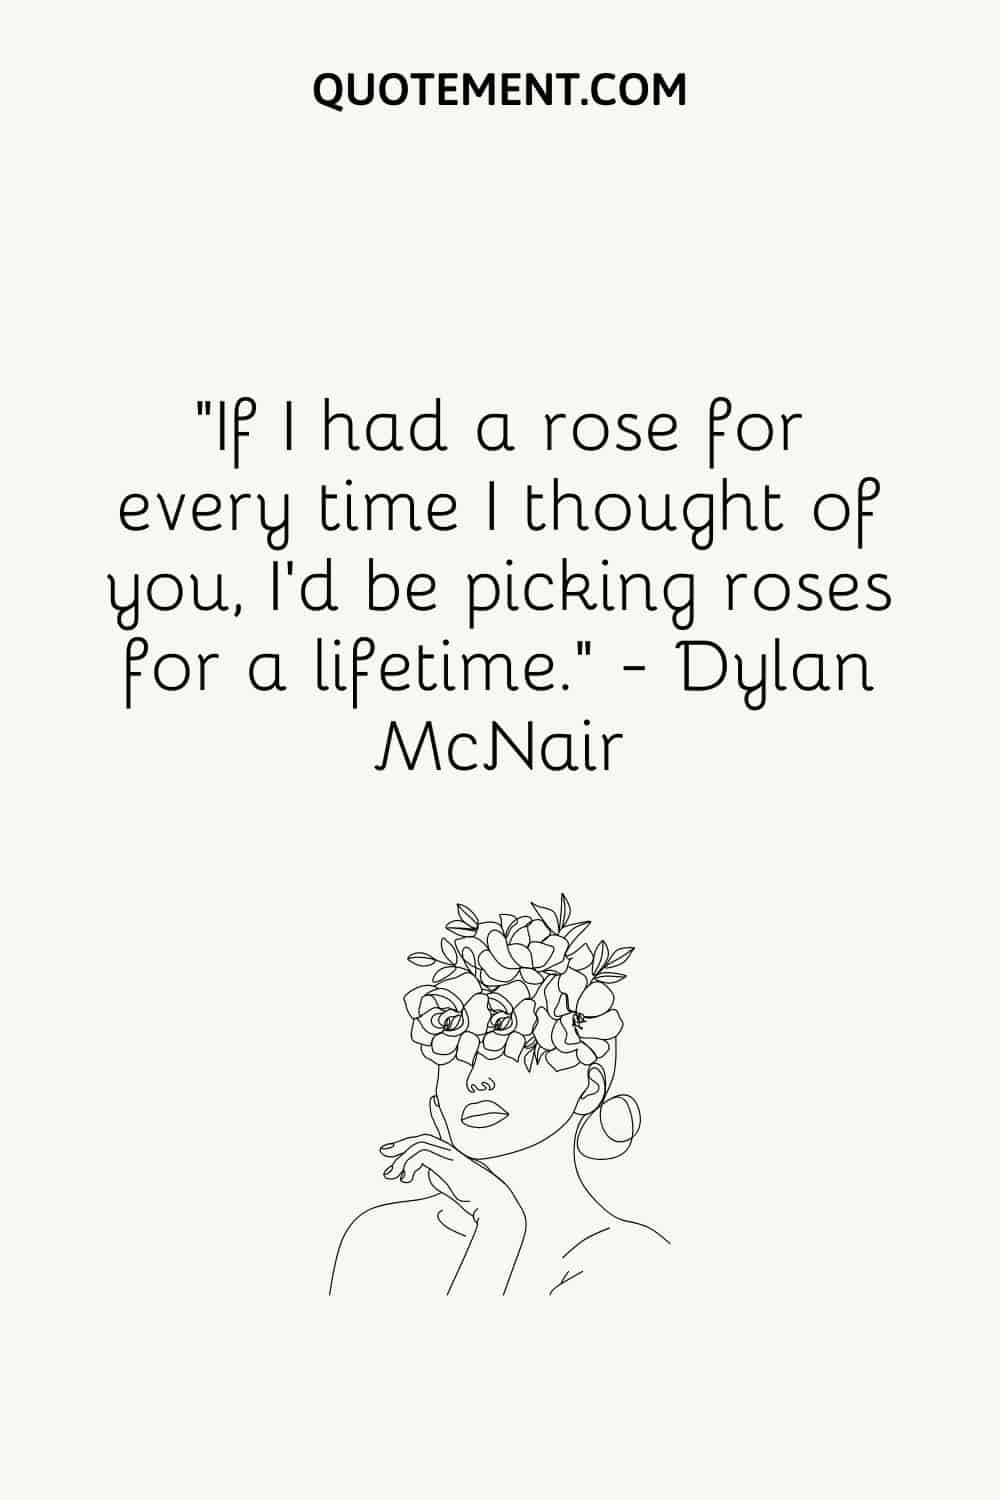 “If I had a rose for every time I thought of you, I’d be picking roses for a lifetime.” — Dylan McNair